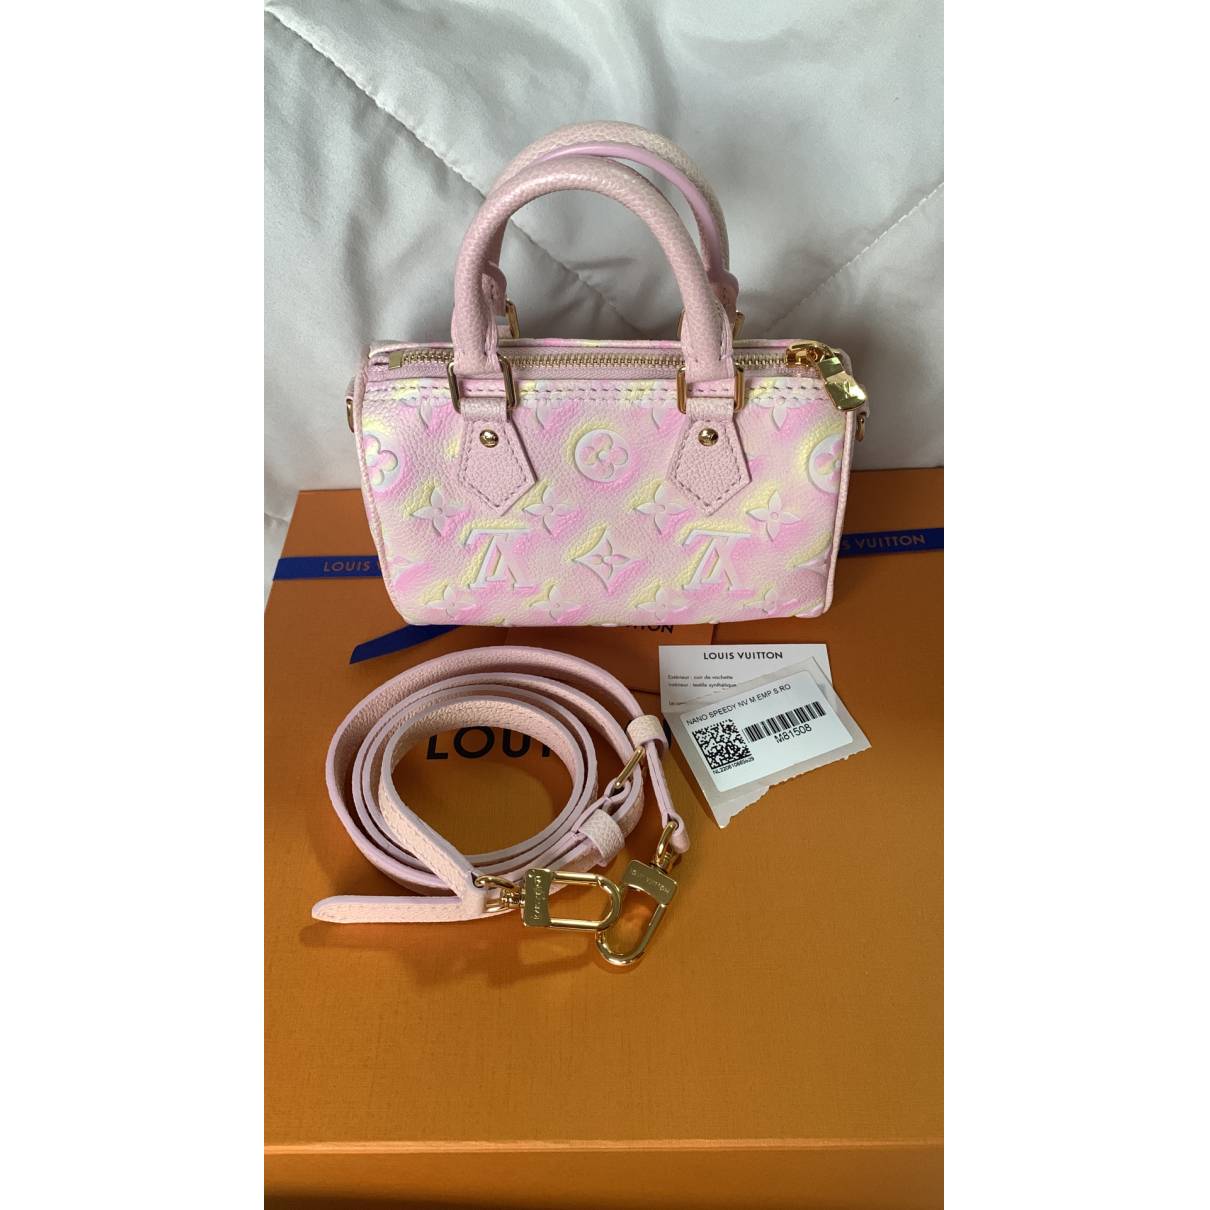 Louis Vuitton - Authenticated Nano Speedy / Mini HL Handbag - Leather Pink for Women, Never Worn, with Tag